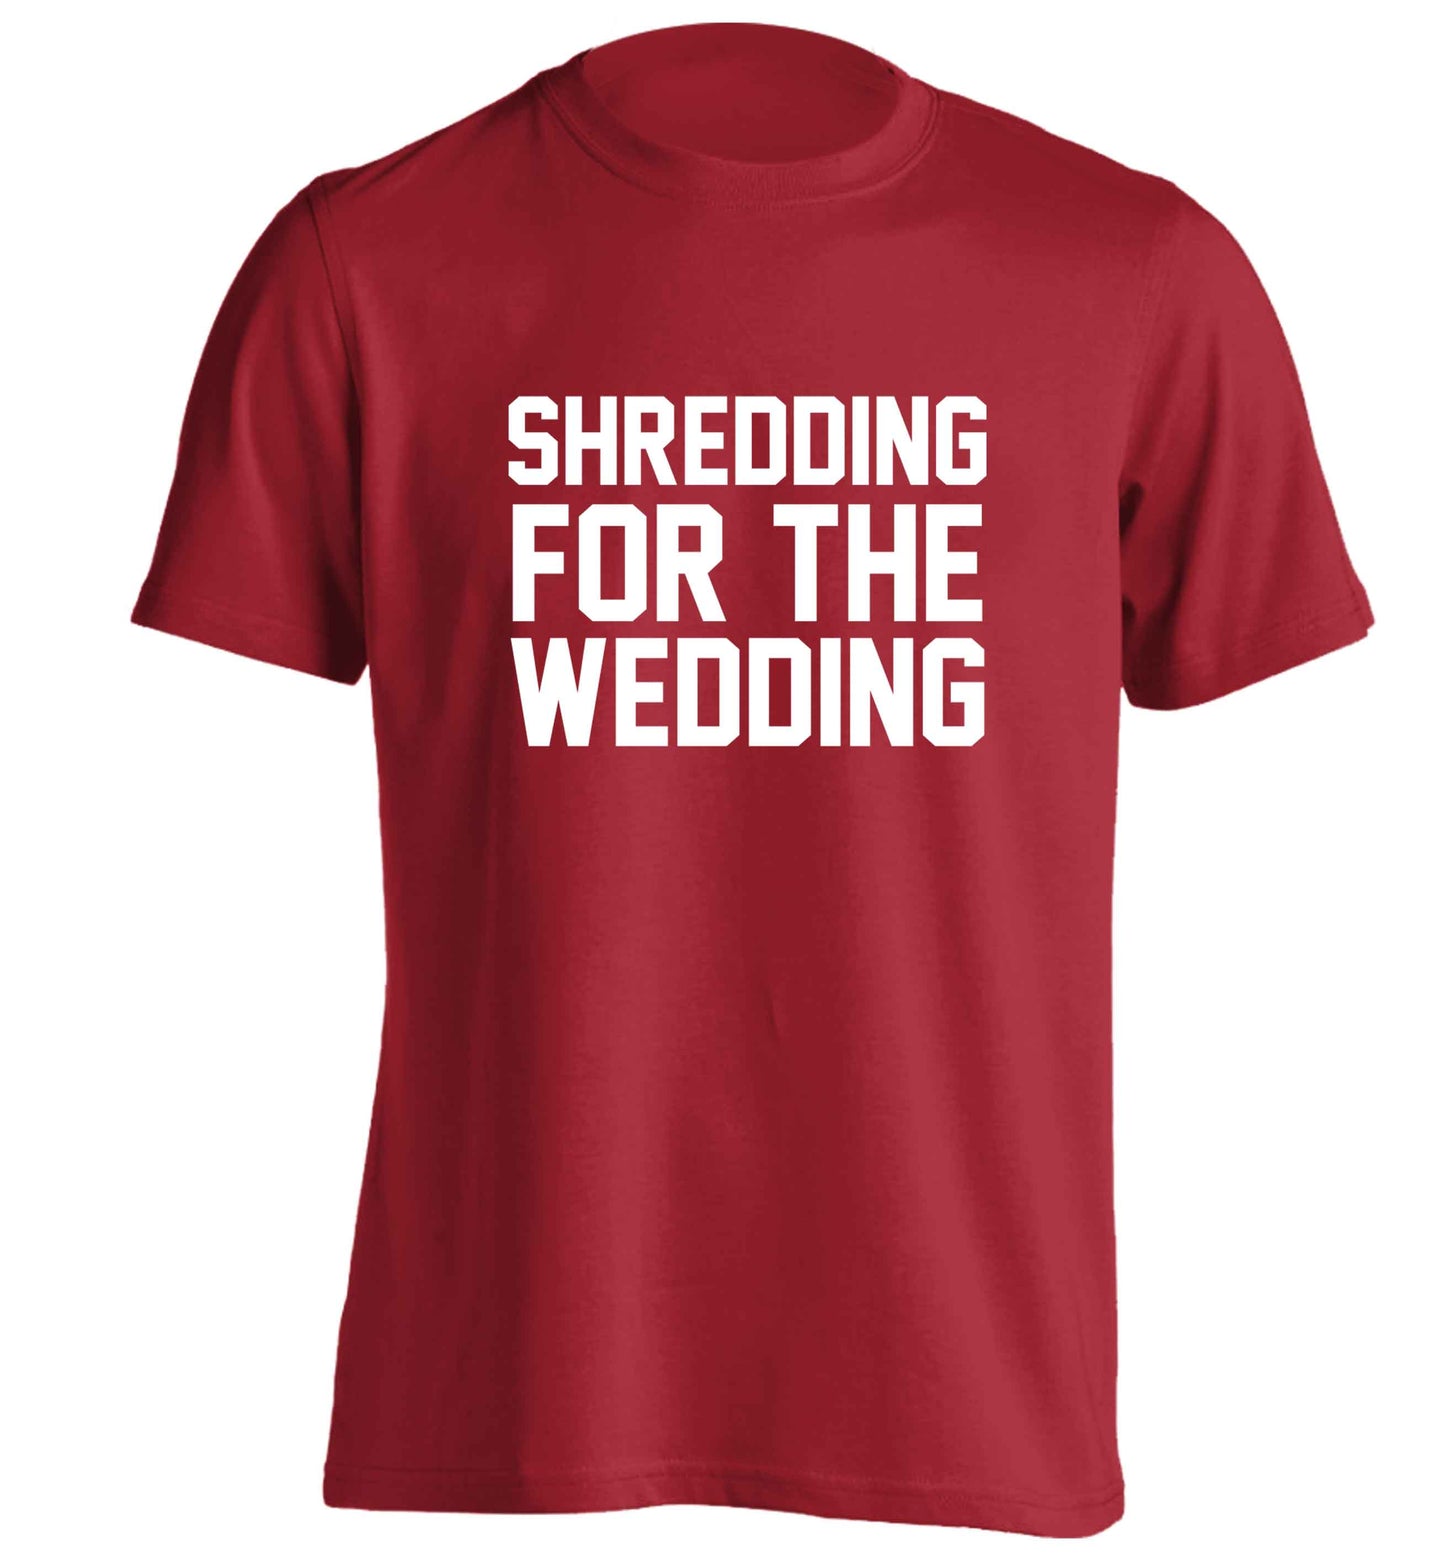 Get motivated and get fit for your big day! Our workout quotes and designs will get you ready to sweat! Perfect for any bride, groom or bridesmaid to be!  adults unisex red Tshirt 2XL